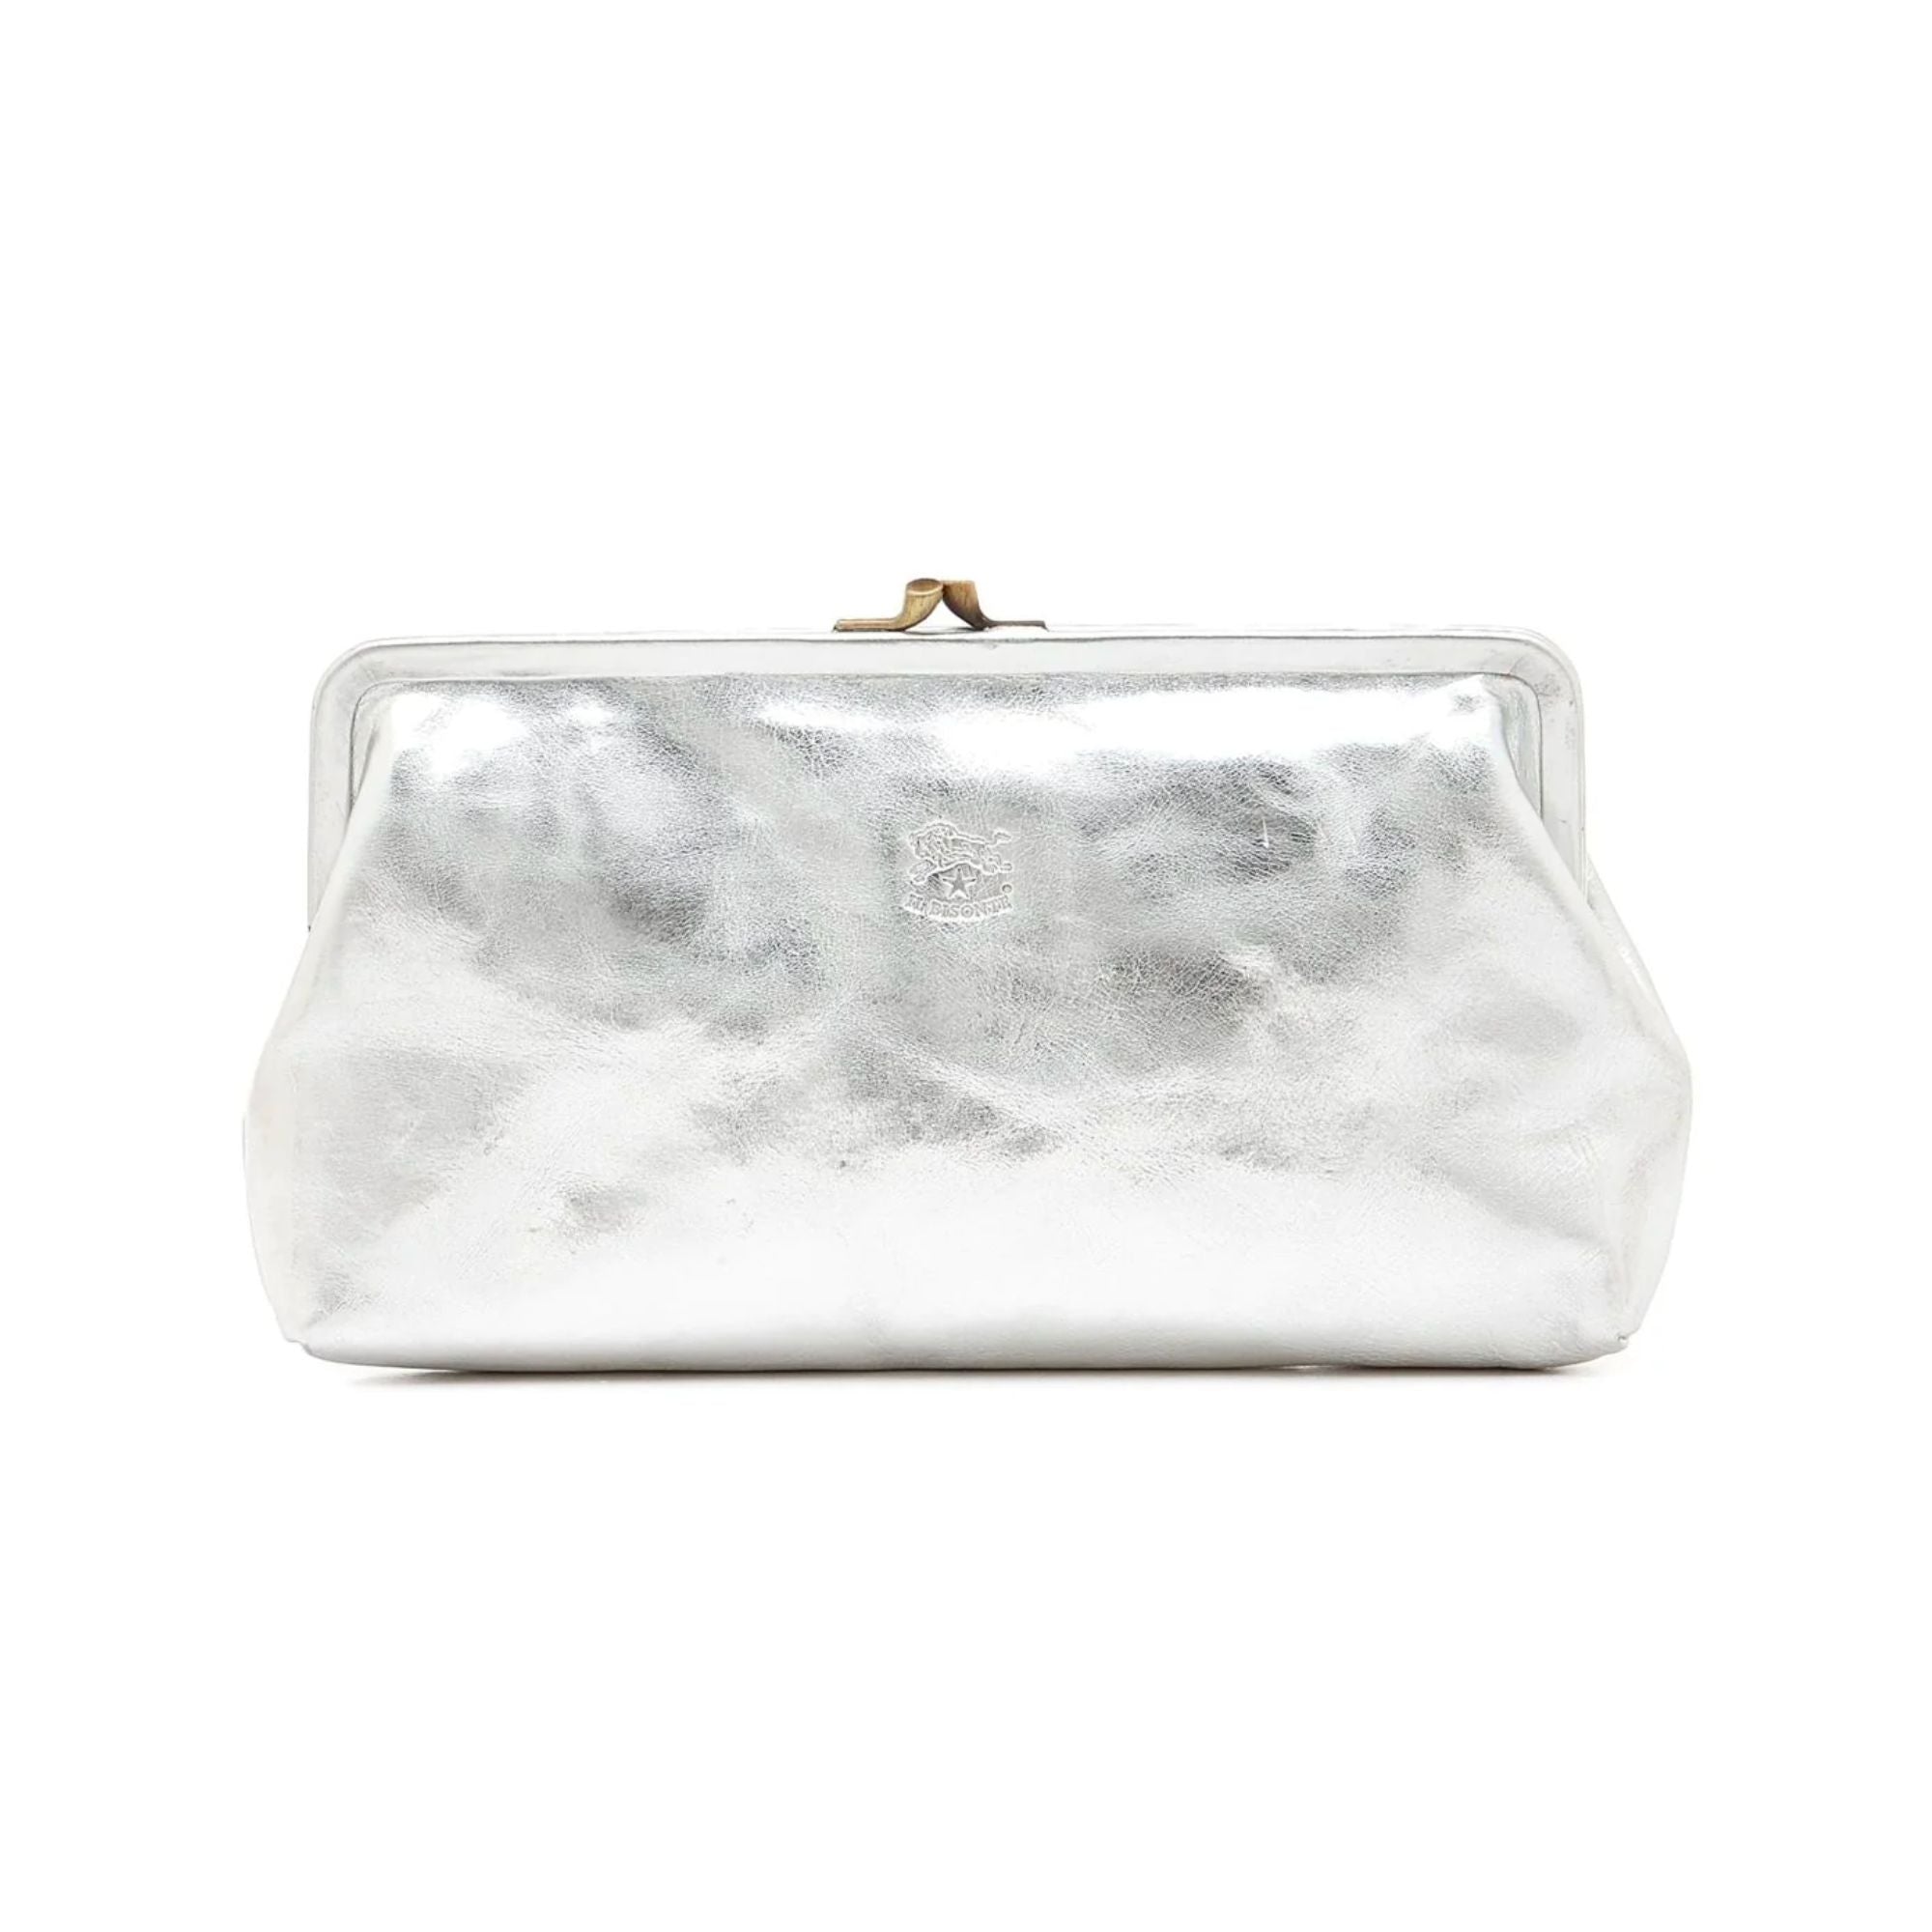 $3995 Judith Leiber Couture Women's Silver Allover Crystal Slim Clutch Purse  Bag | eBay